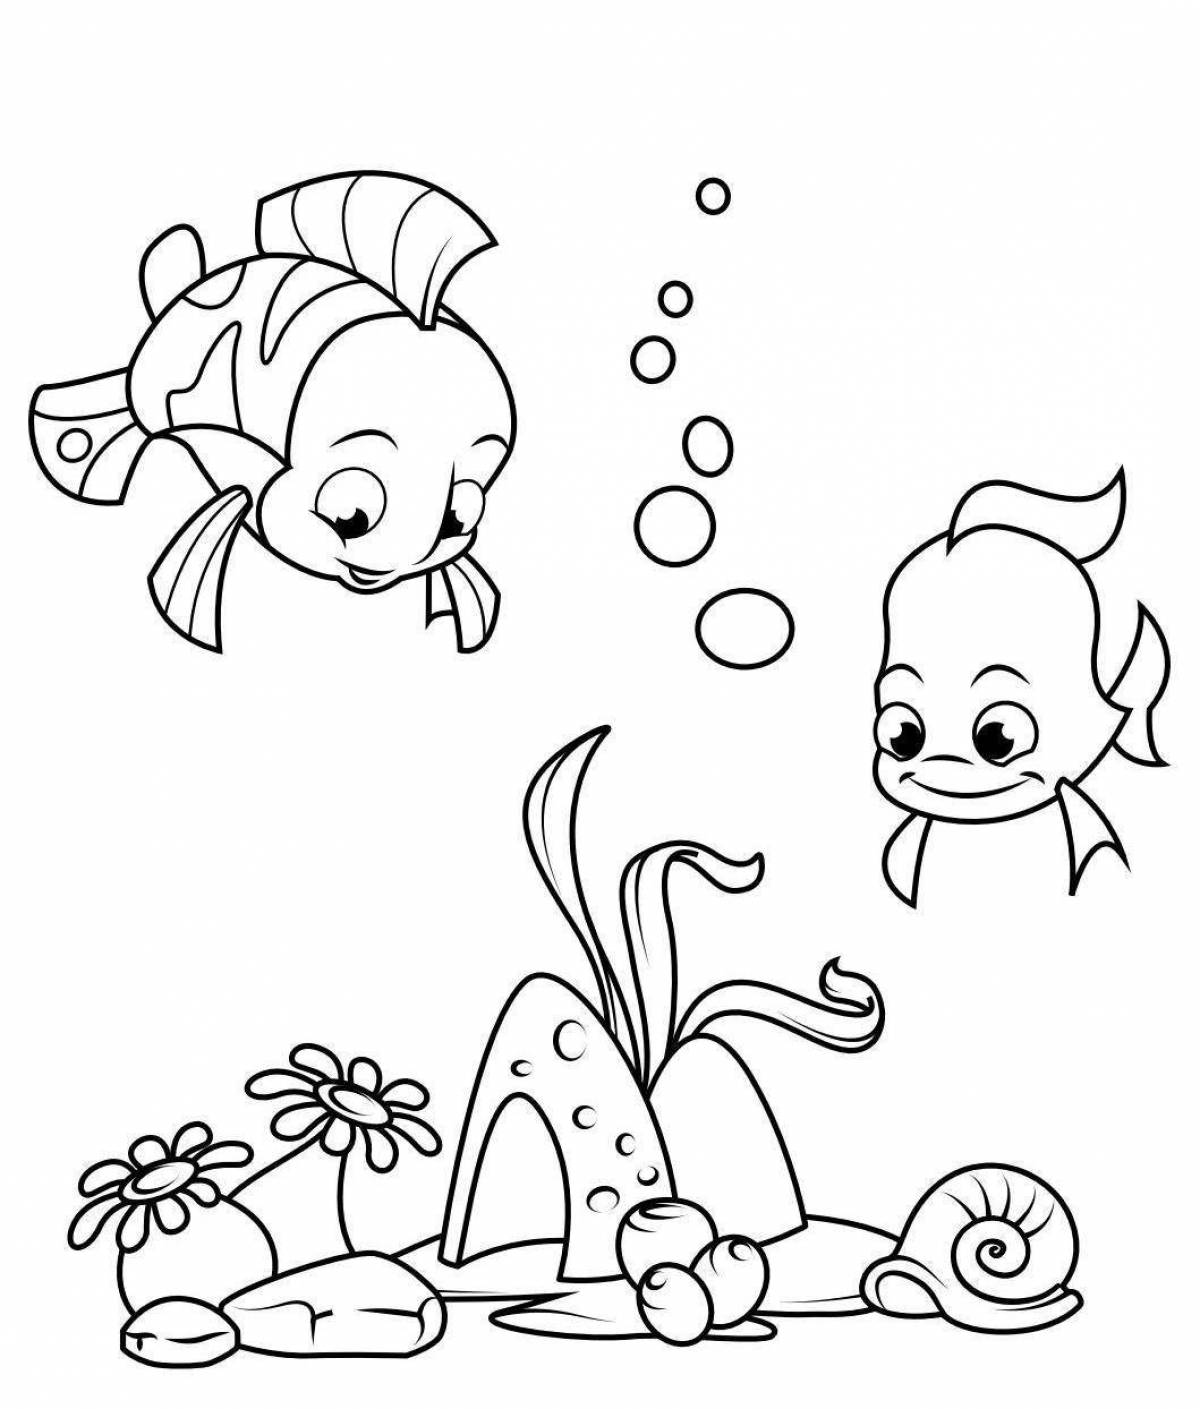 Coloring page dazzling guppy fish